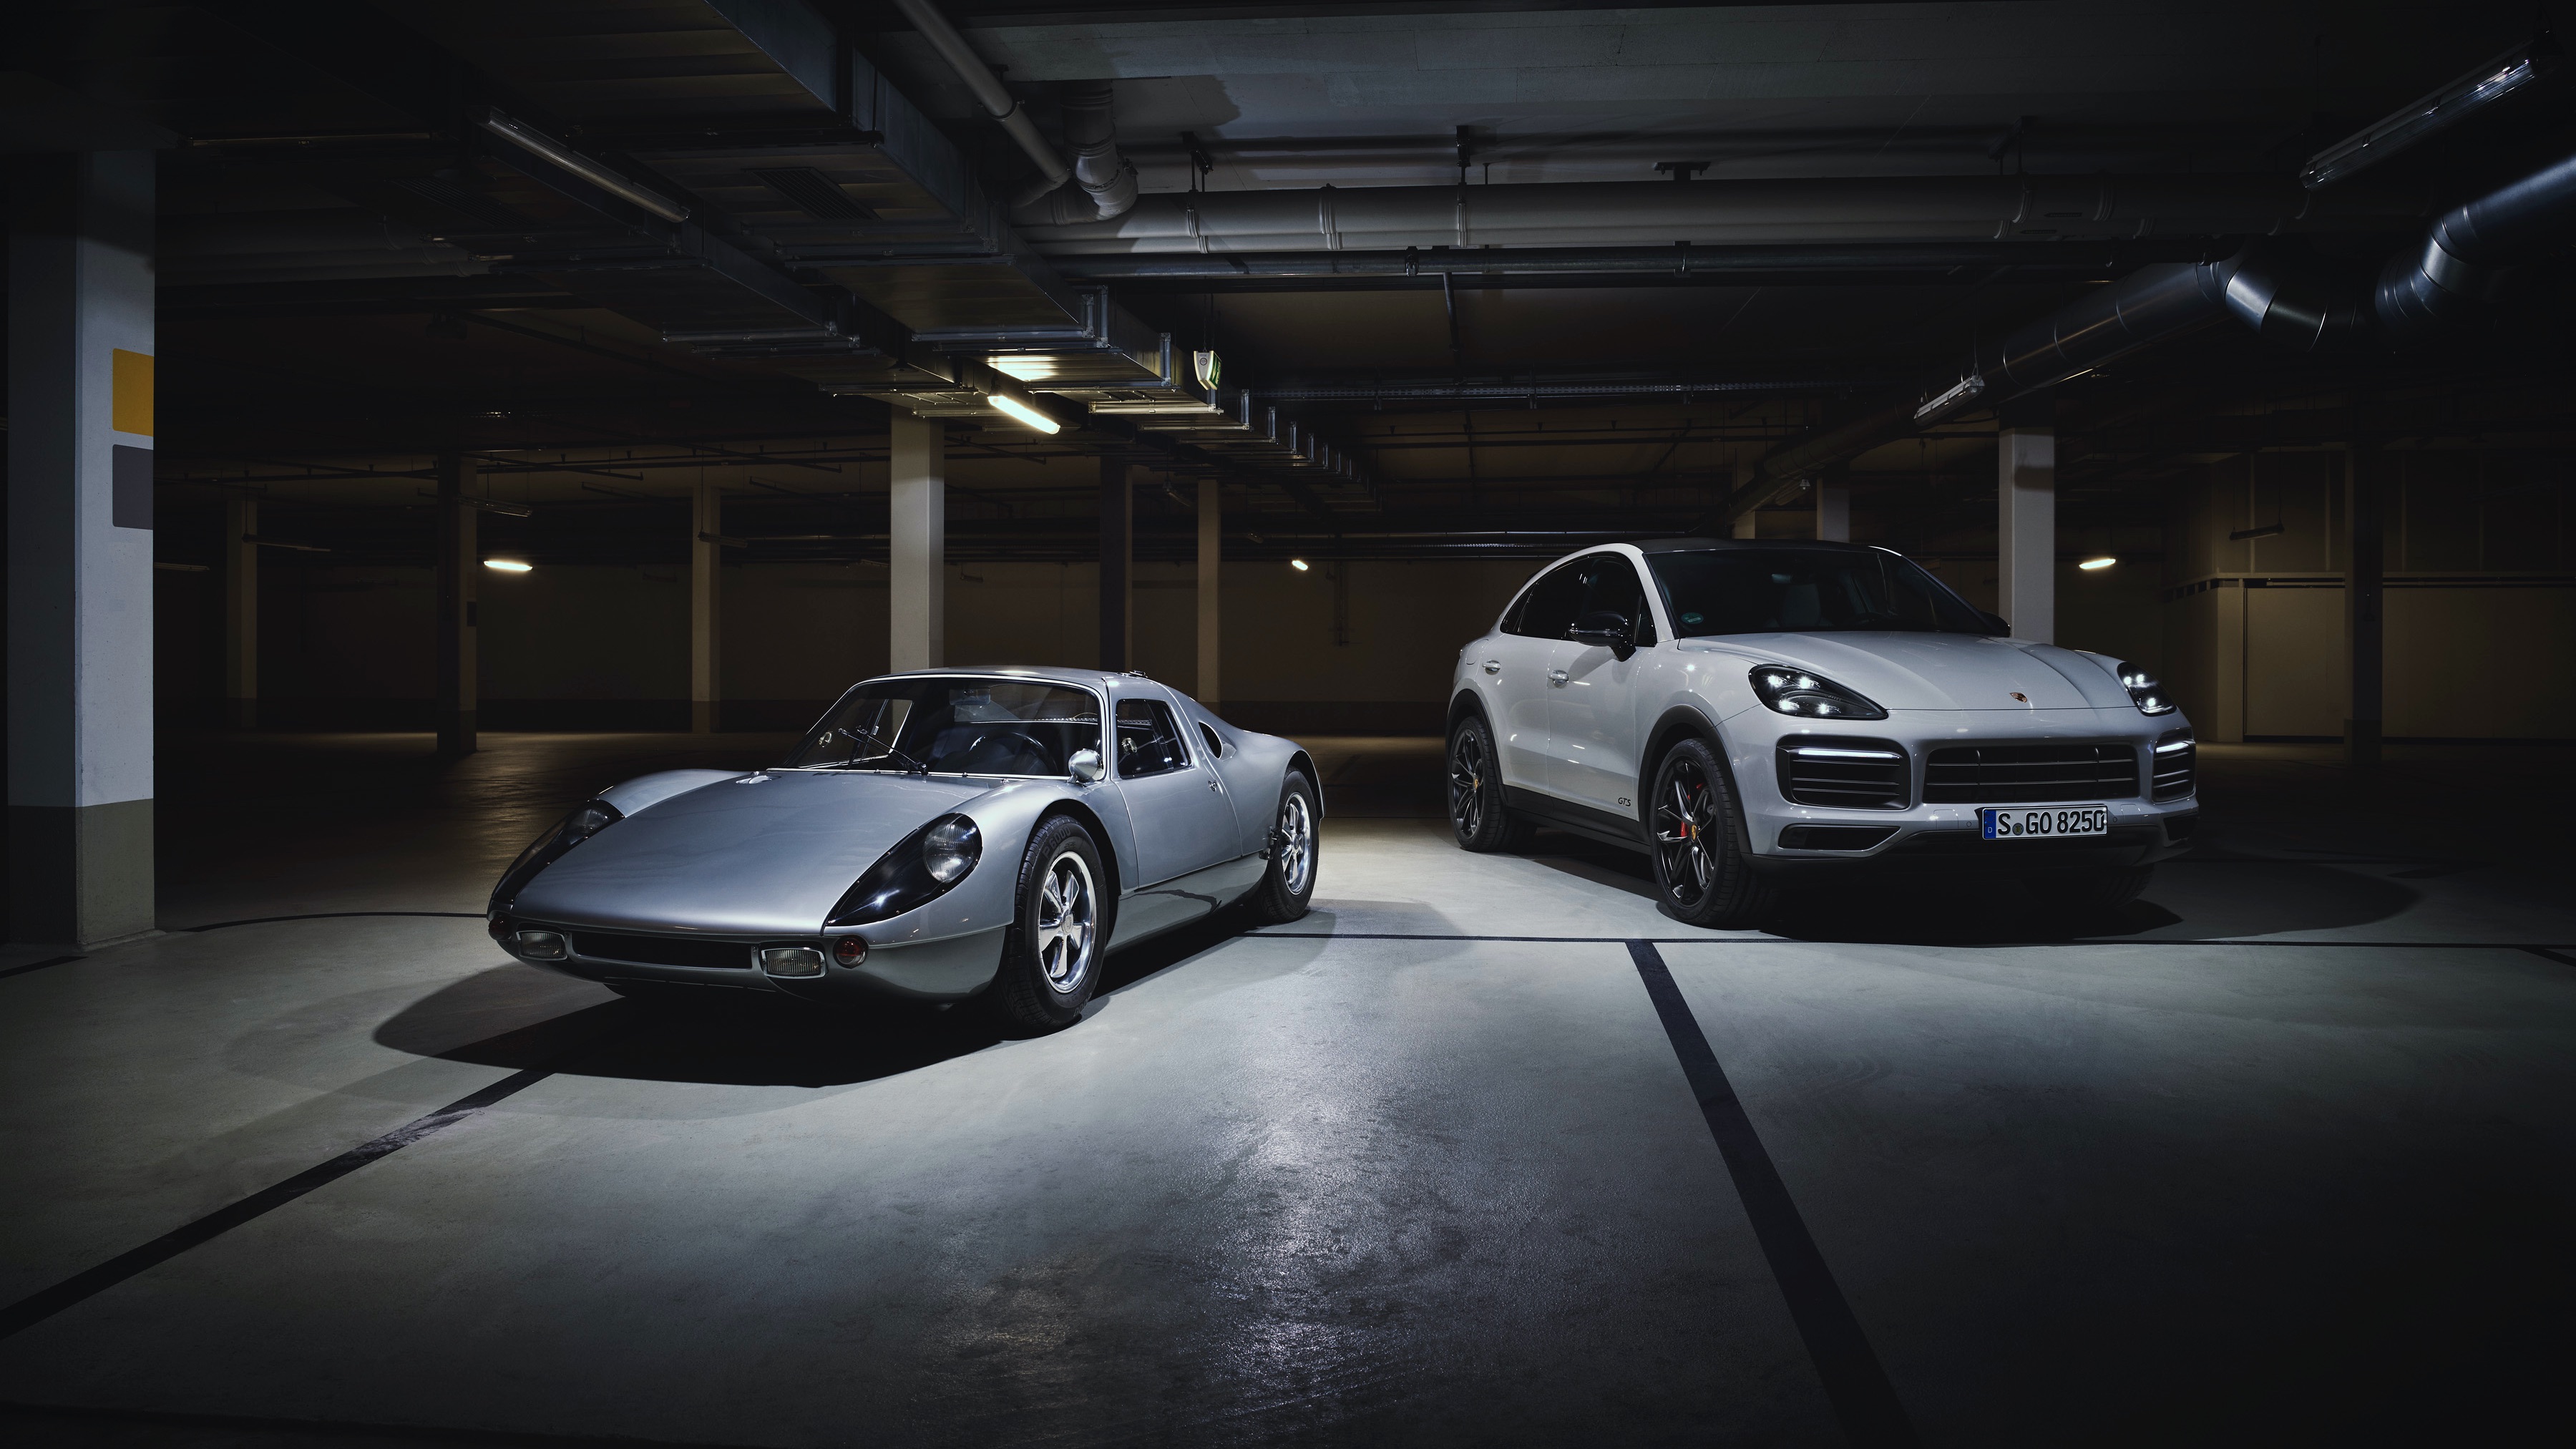 904 Carrera GTS and Porsche Cayenne side-by-side